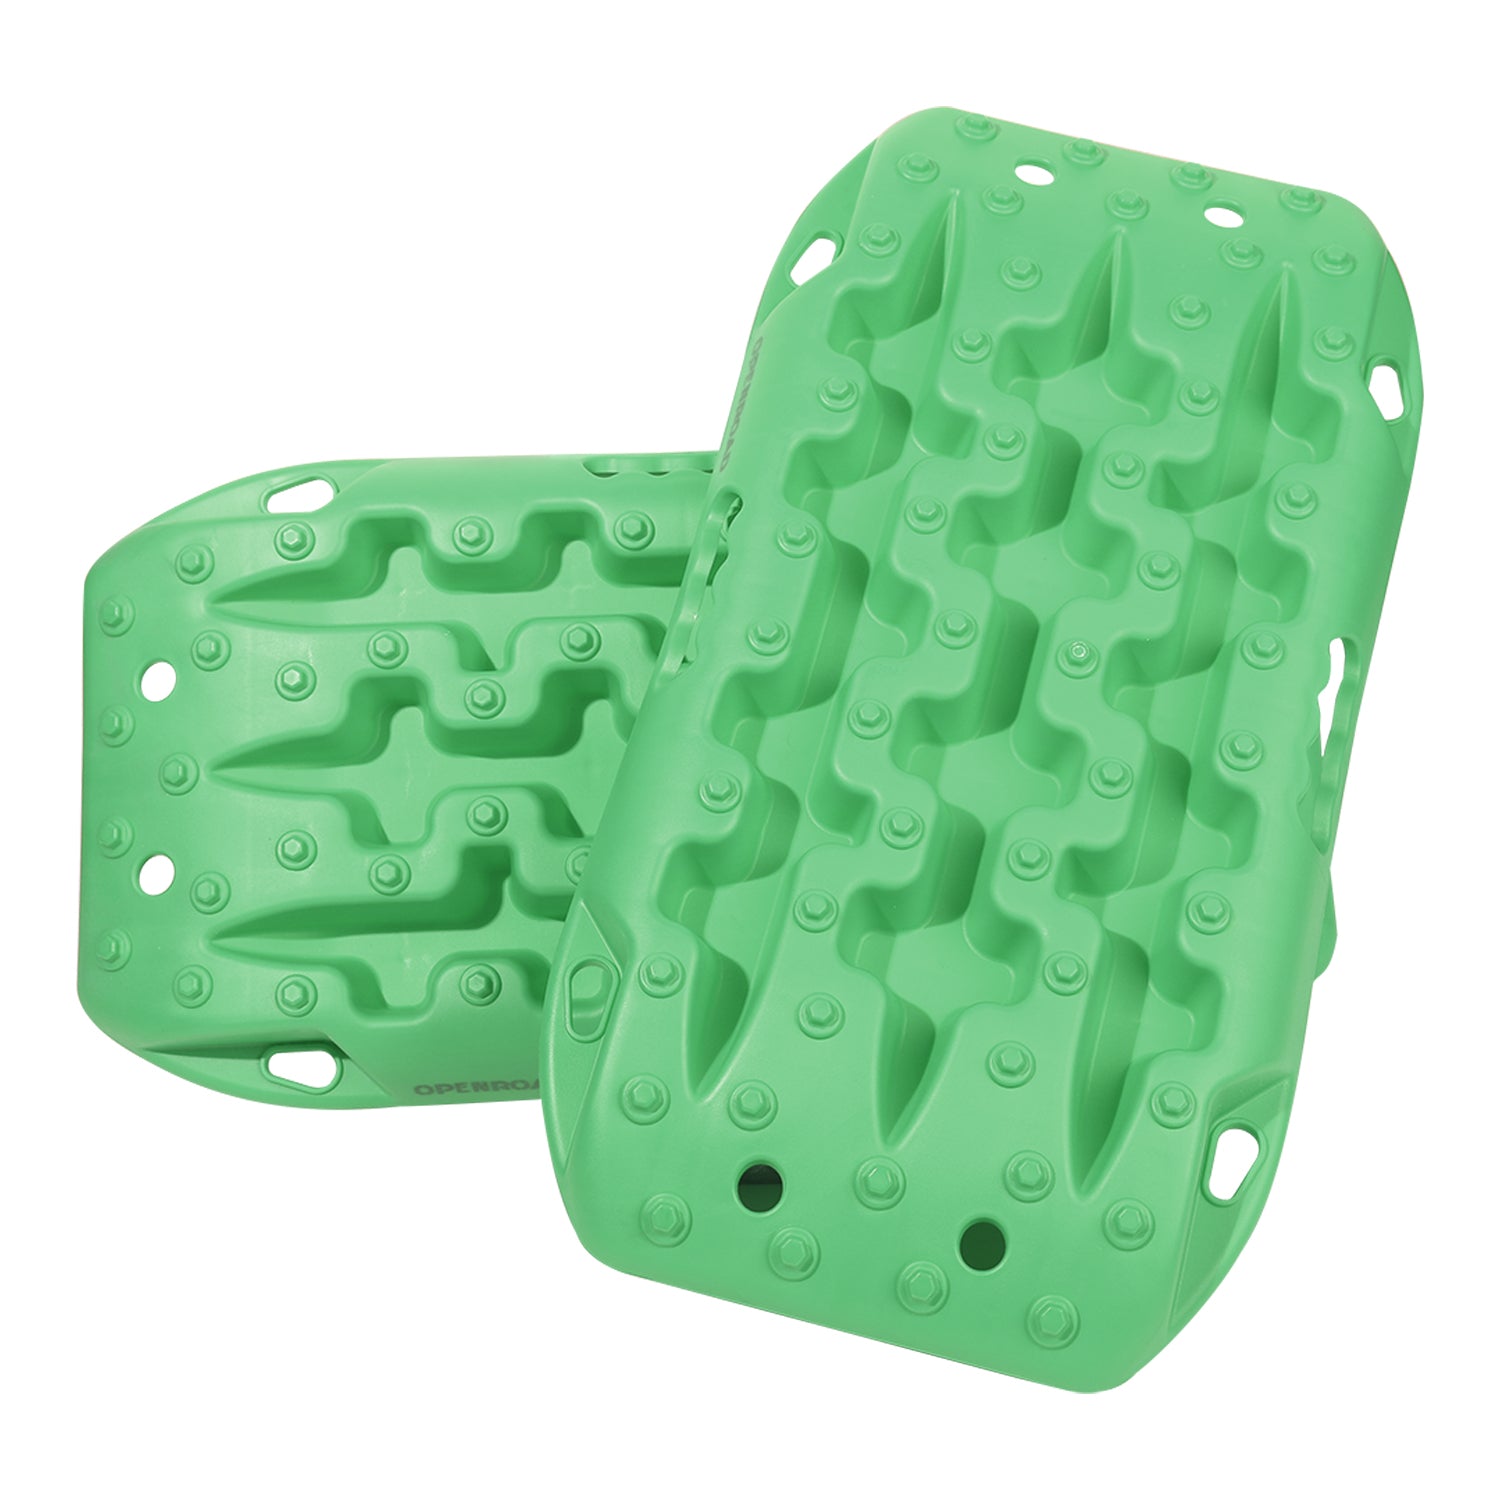 OPENROAD 5 Generation Off-Road Traction Boards (2pcs) | Green Recovery Traction Boards OPENROAD Green  